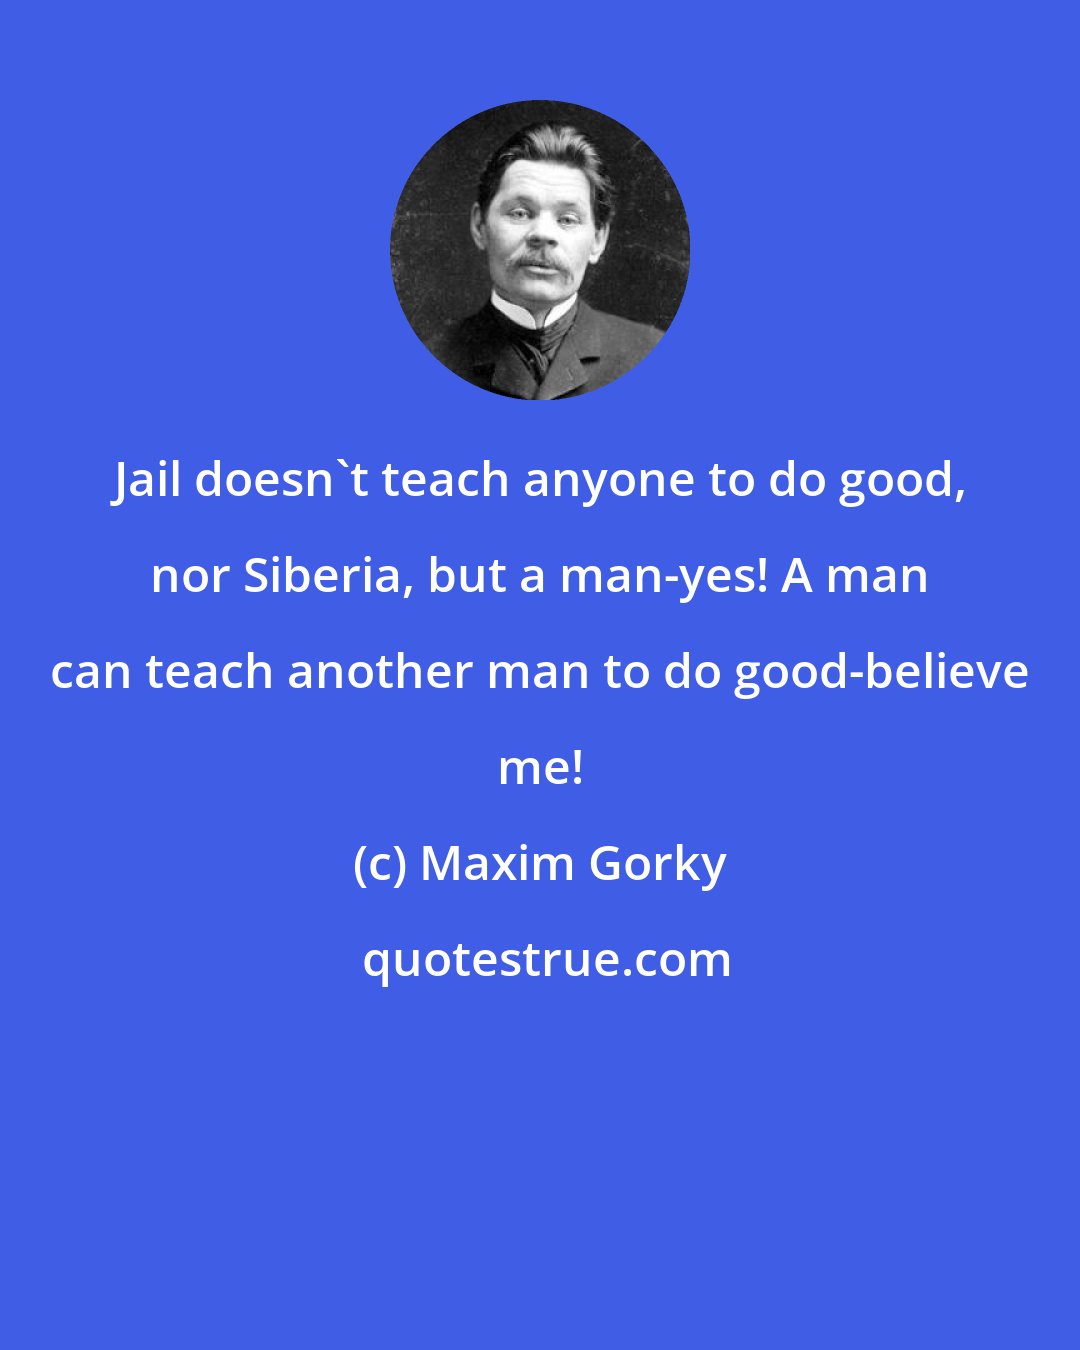 Maxim Gorky: Jail doesn't teach anyone to do good, nor Siberia, but a man-yes! A man can teach another man to do good-believe me!